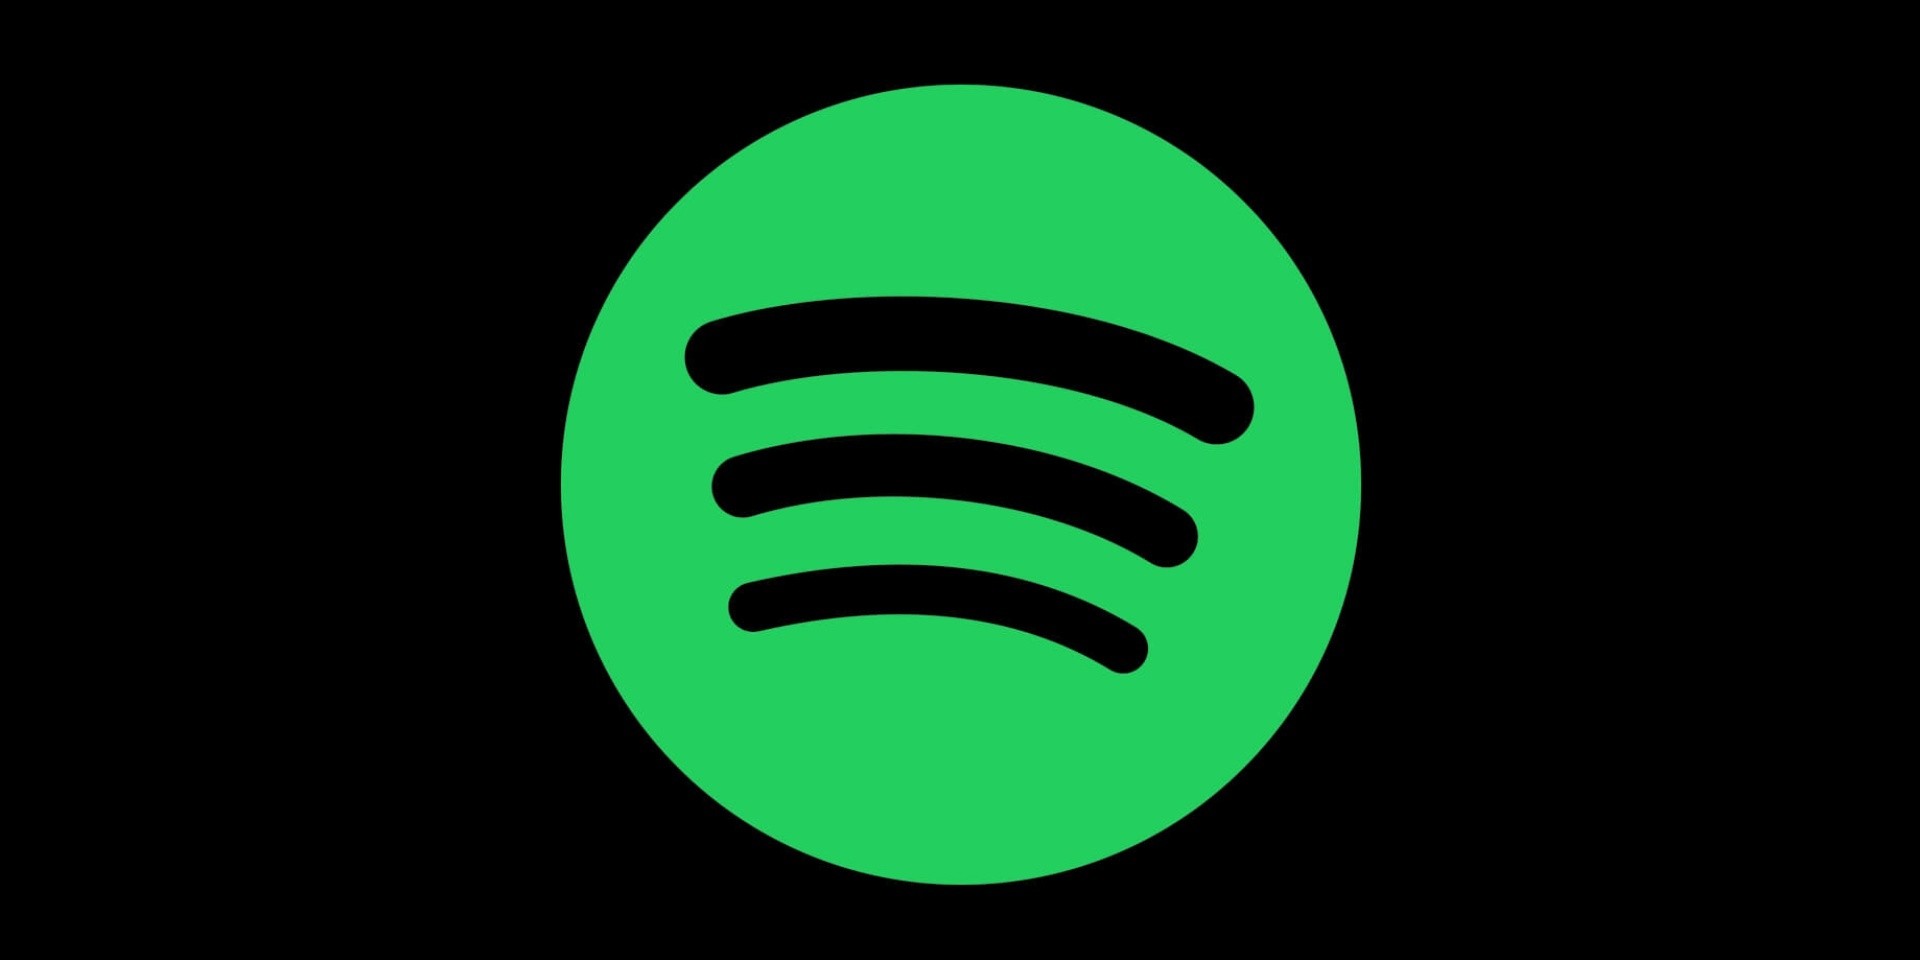 Spotify gains 1 million followers a week after launch in India